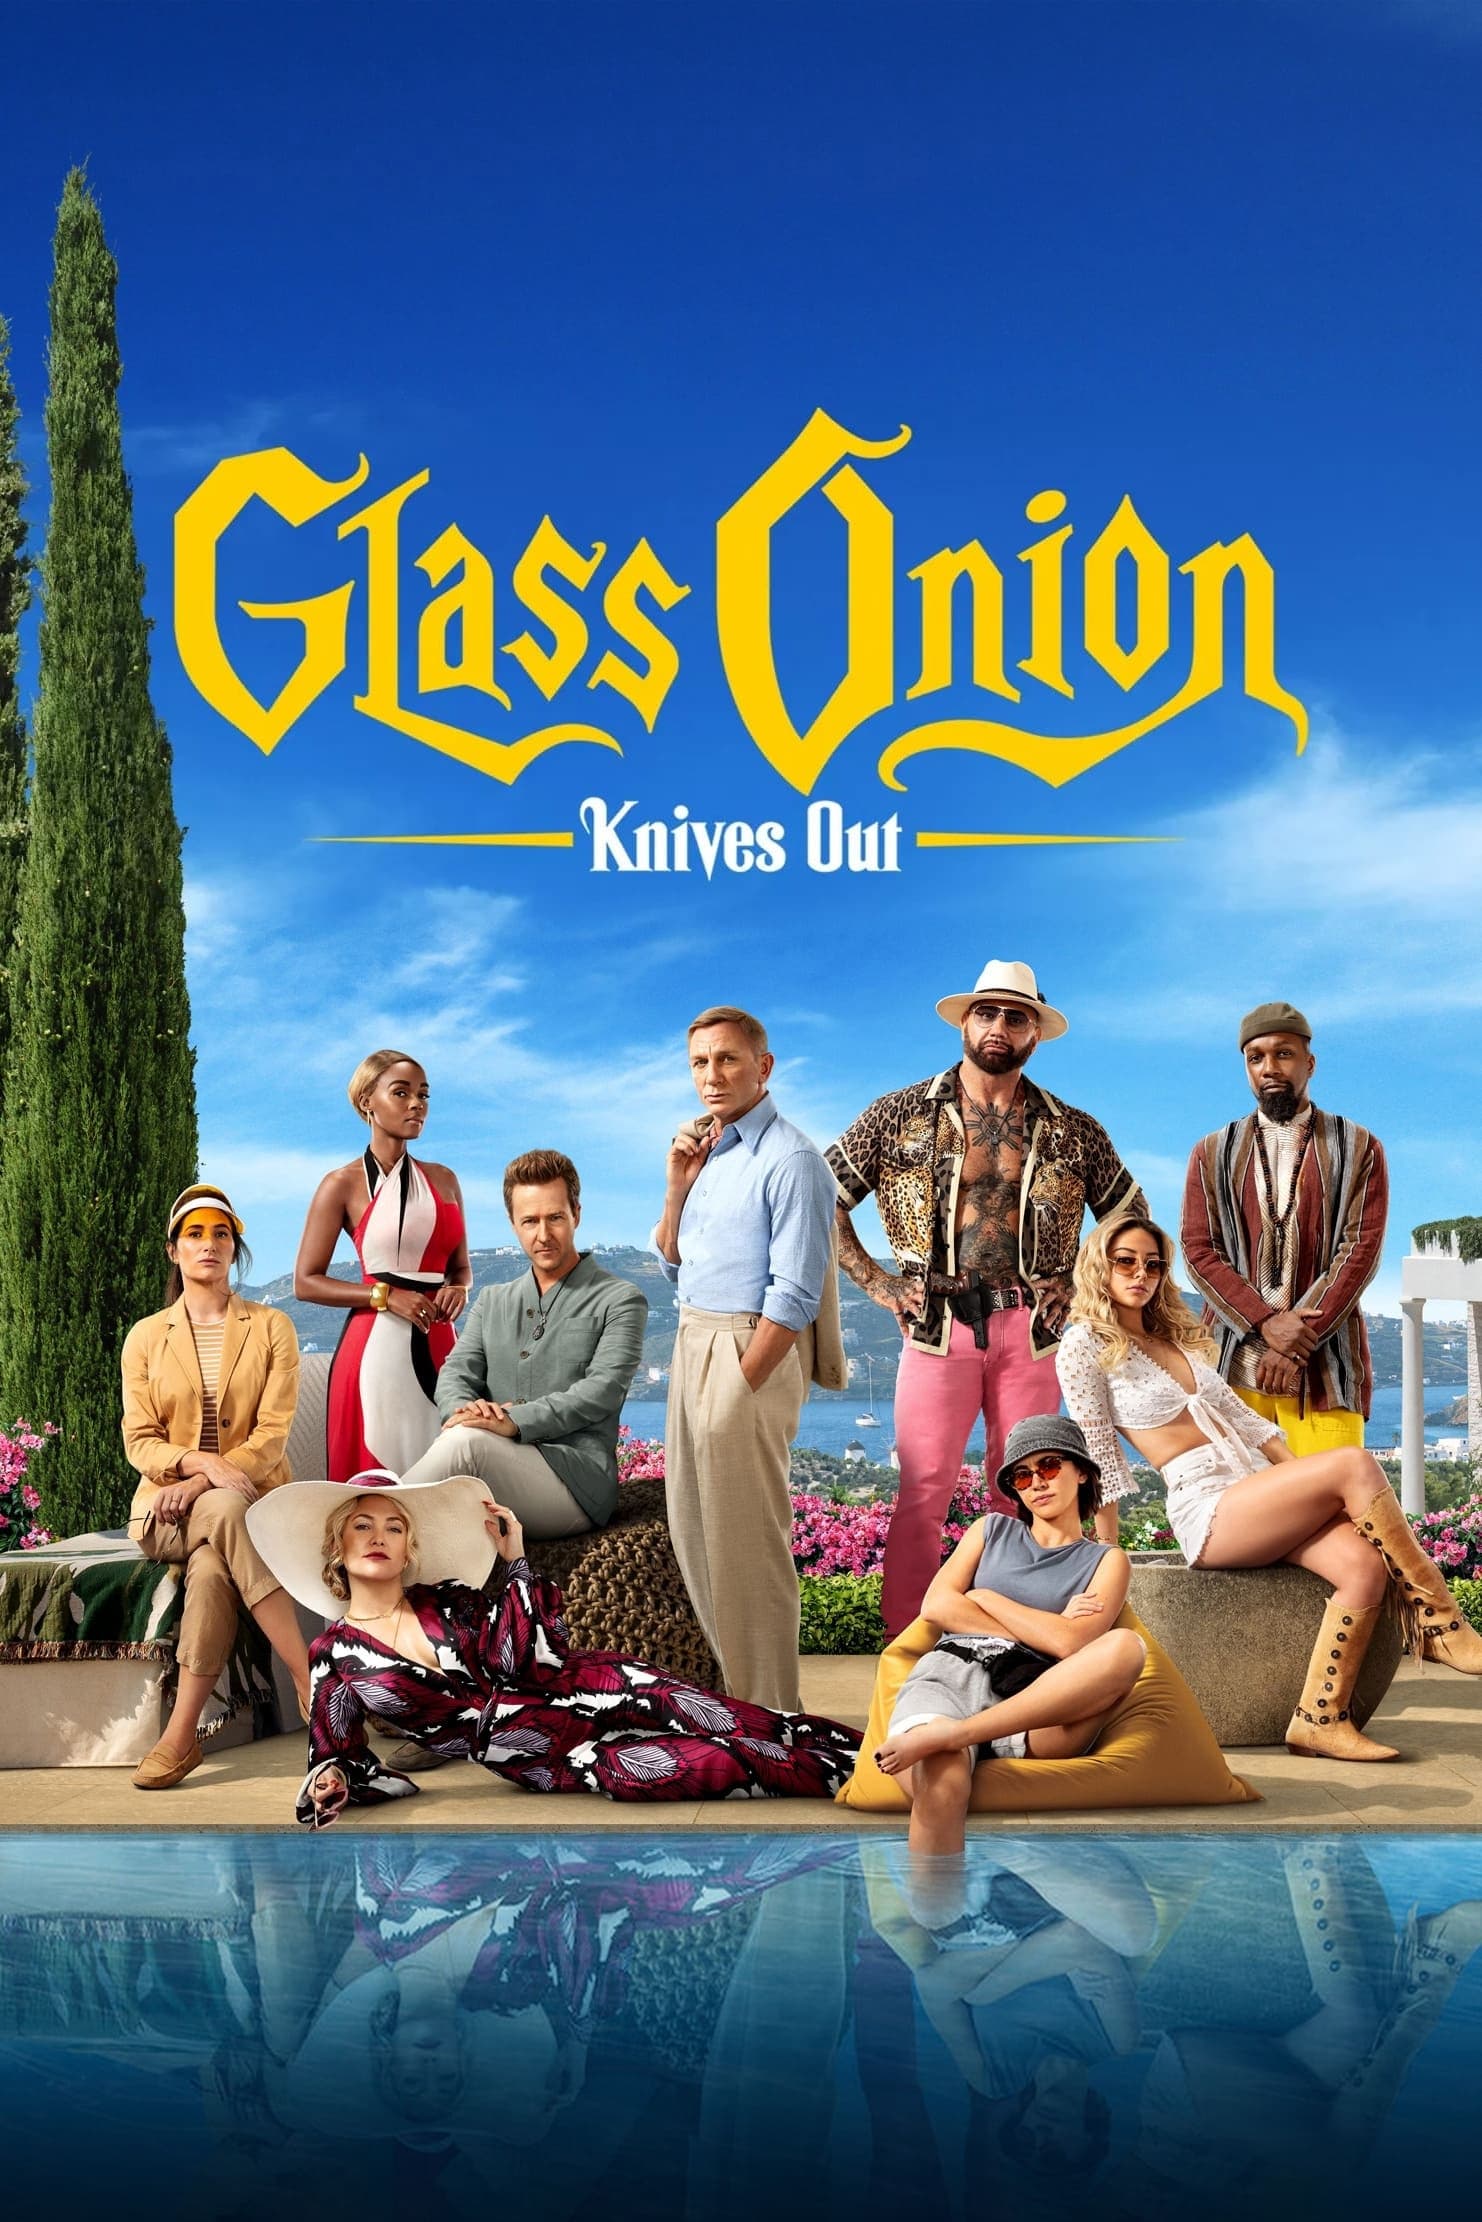 Glass Onion - Knives Out film